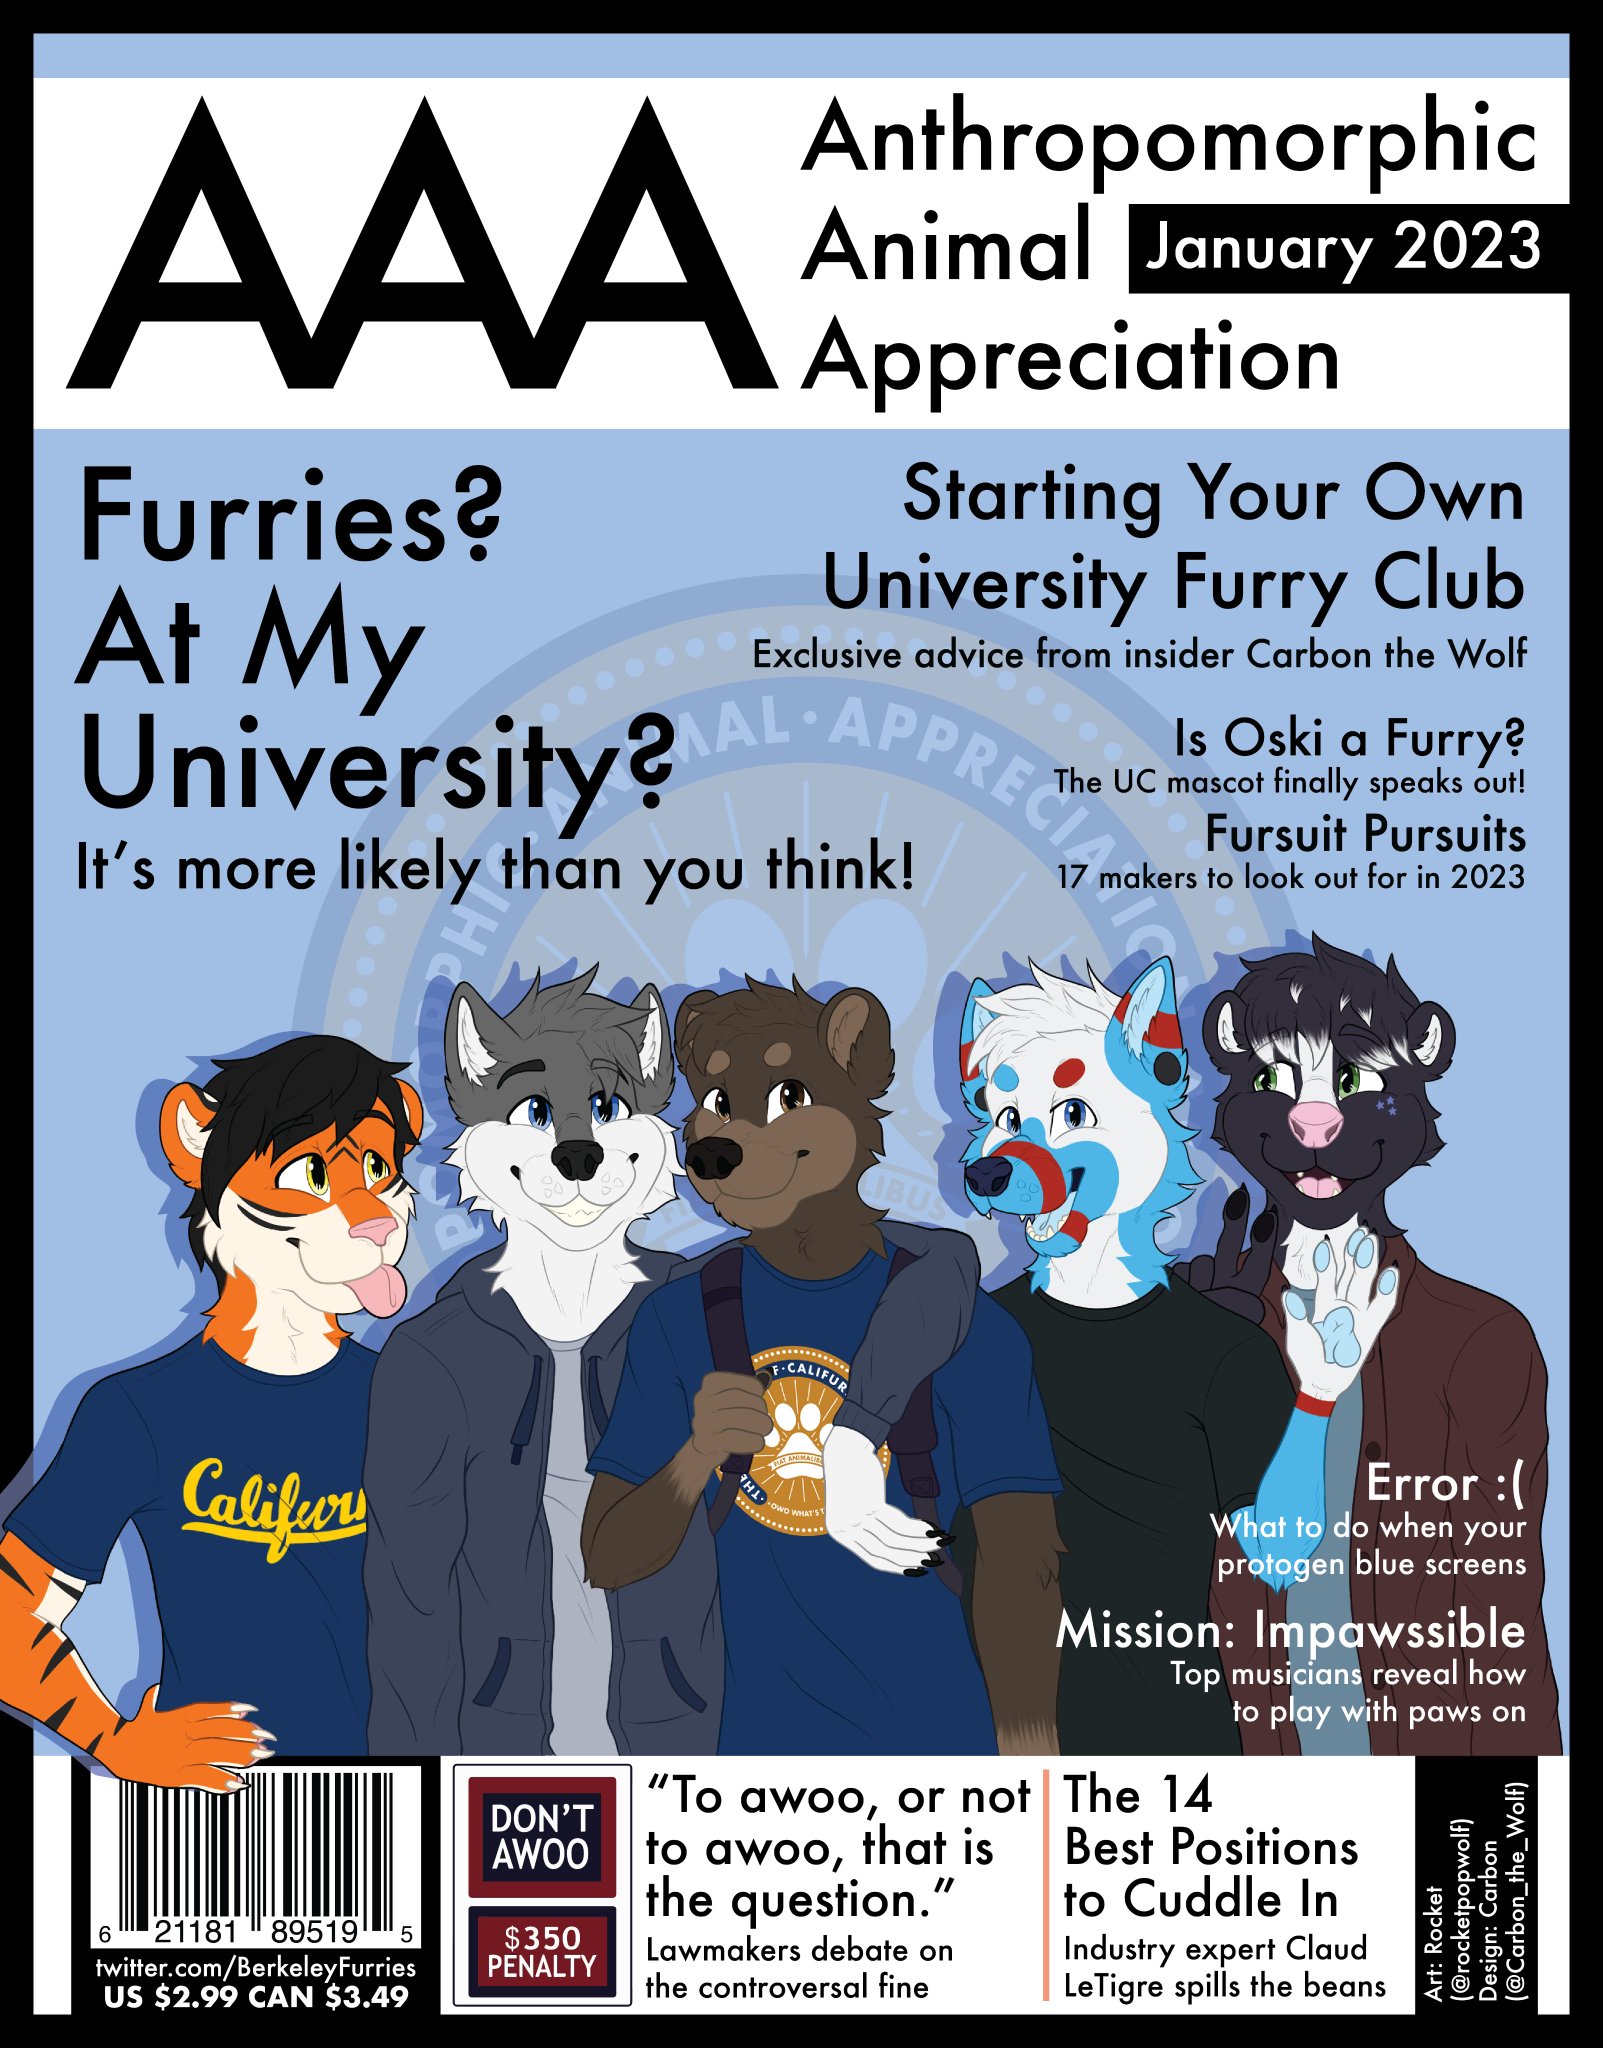 Community - MetaSteam, July 2023 - This one will turn you into a furry